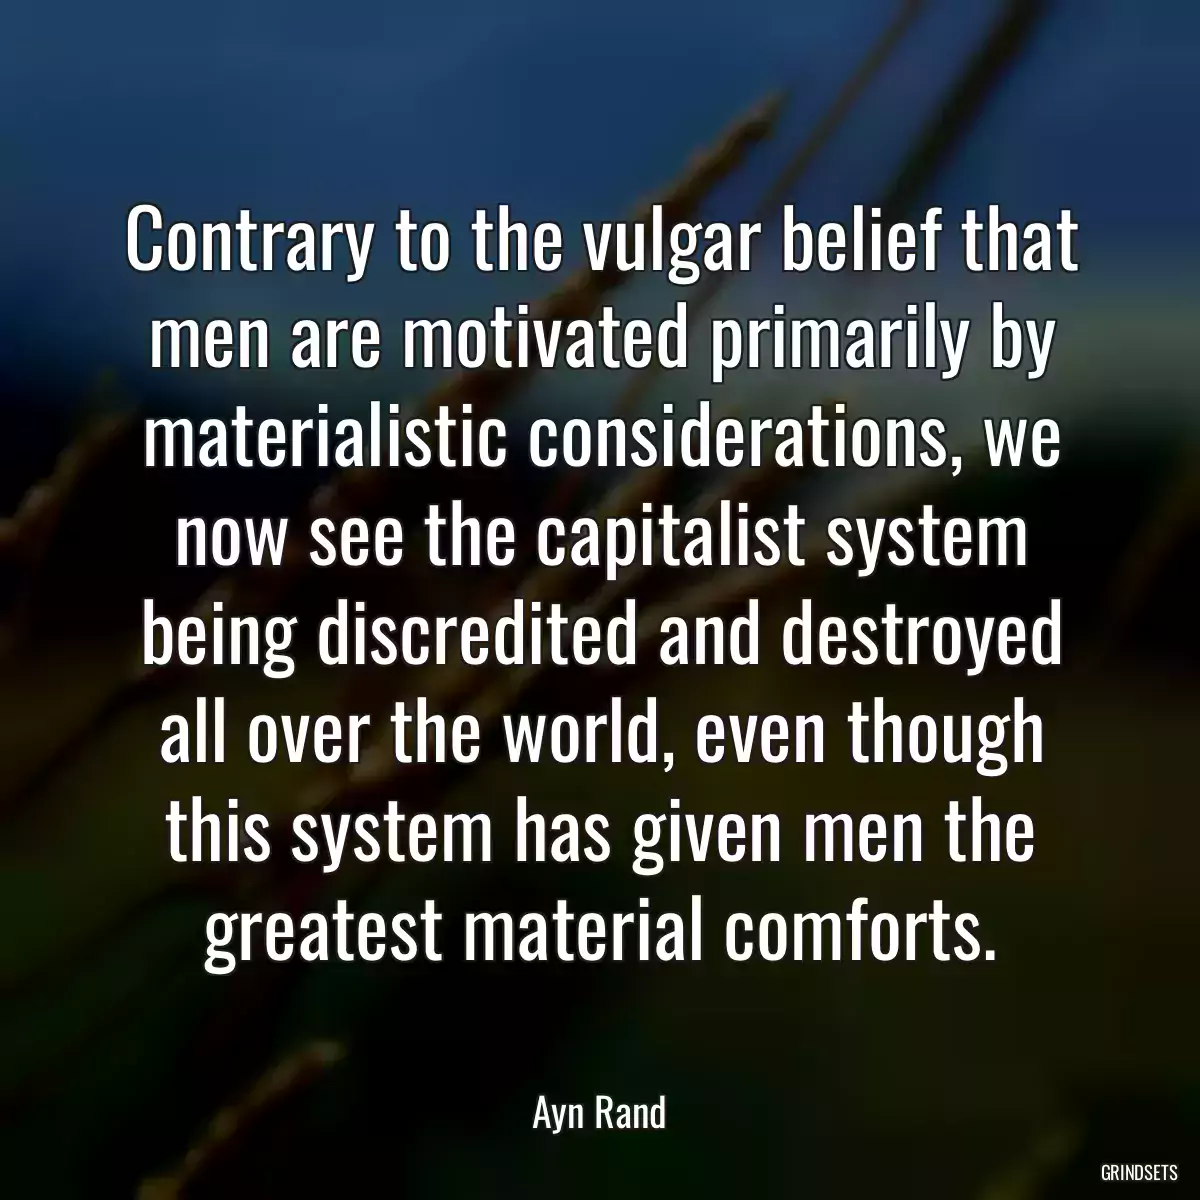 Contrary to the vulgar belief that men are motivated primarily by materialistic considerations, we now see the capitalist system being discredited and destroyed all over the world, even though this system has given men the greatest material comforts.